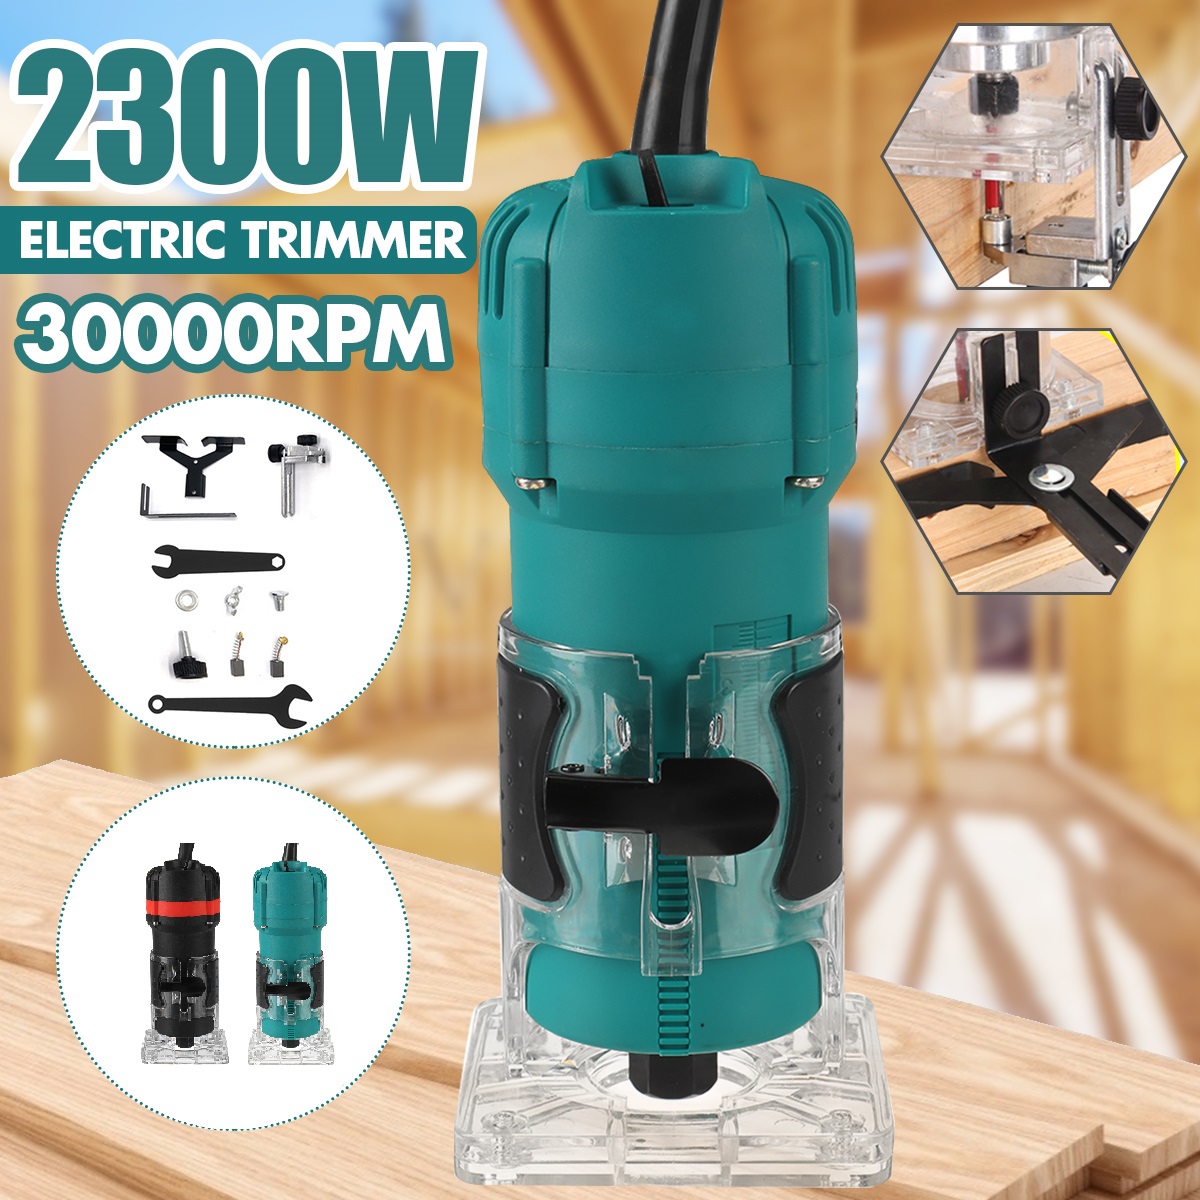 110V220V-30000RPM-Electric-Hand-Trimmer-Router-635mm-Wood-Laminator-Palm-Joiners-Working-Cutting-Too-1736422-1